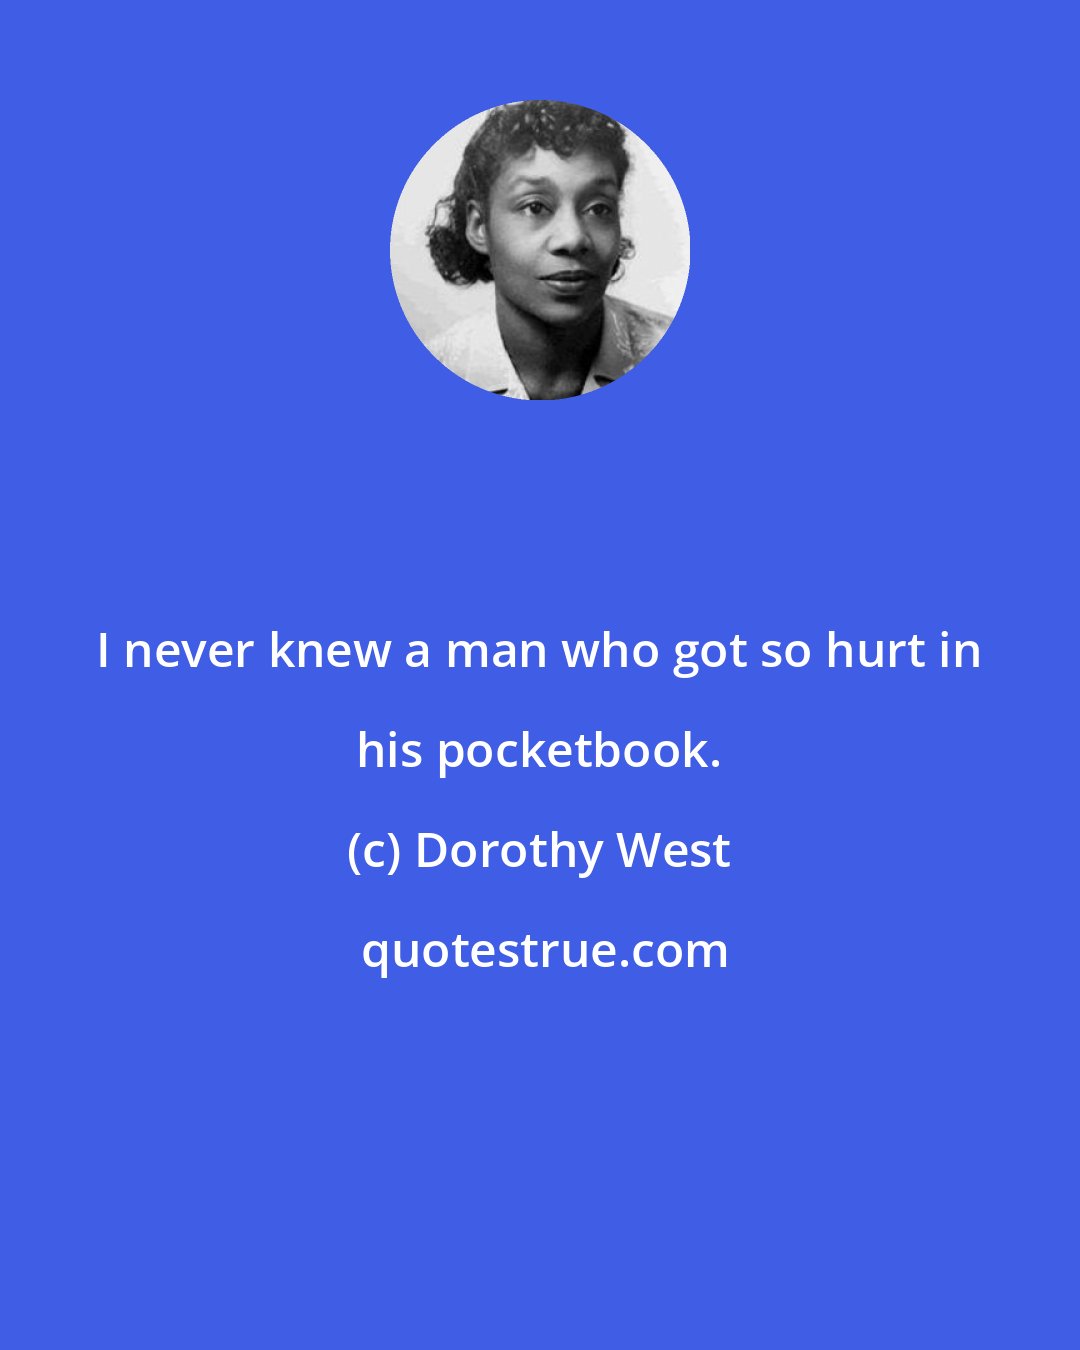 Dorothy West: I never knew a man who got so hurt in his pocketbook.